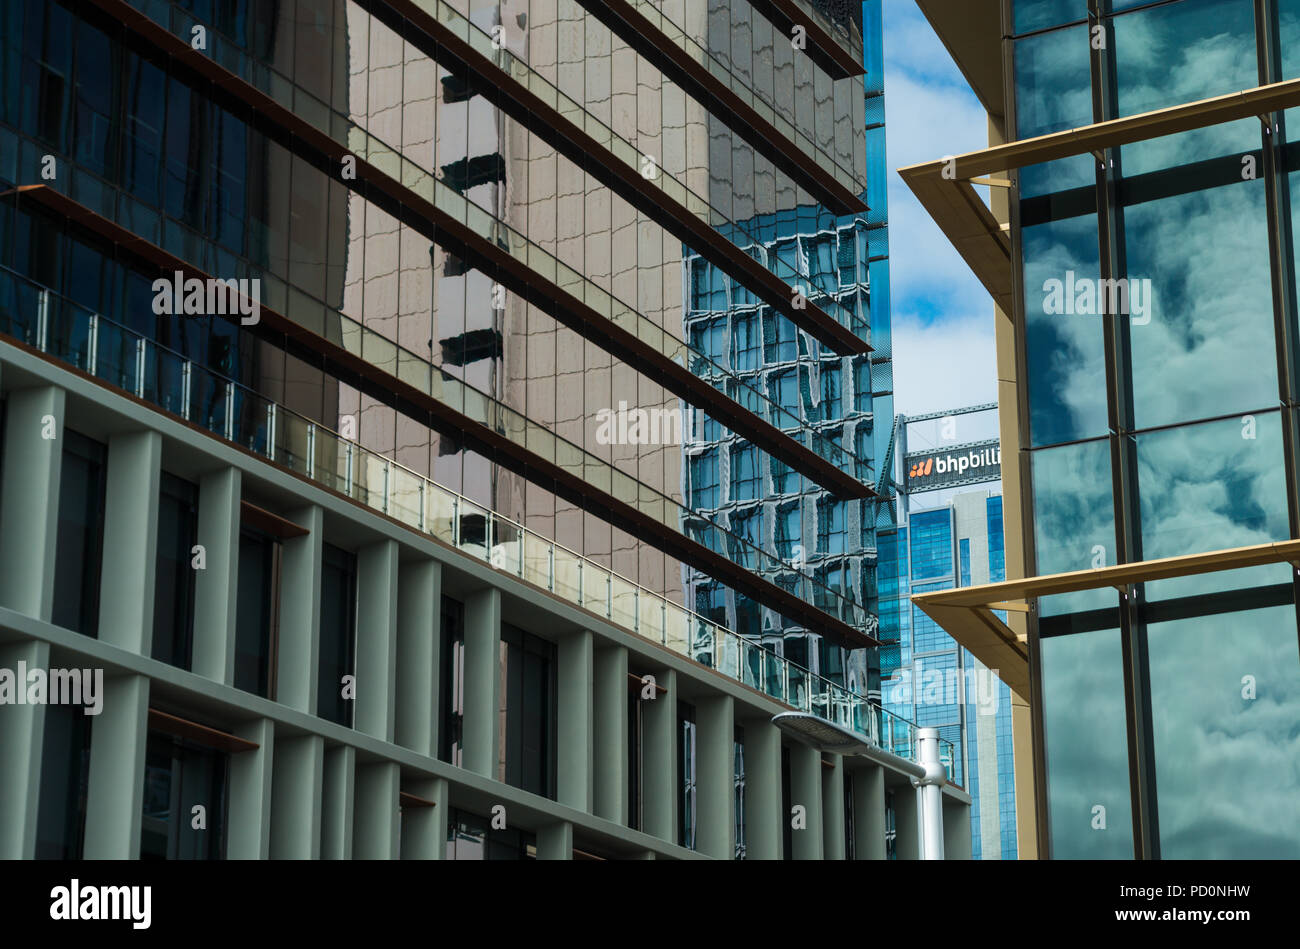 Close-up of details of some glass facades with reflections in Perth, Western Australia, Australia Stock Photo